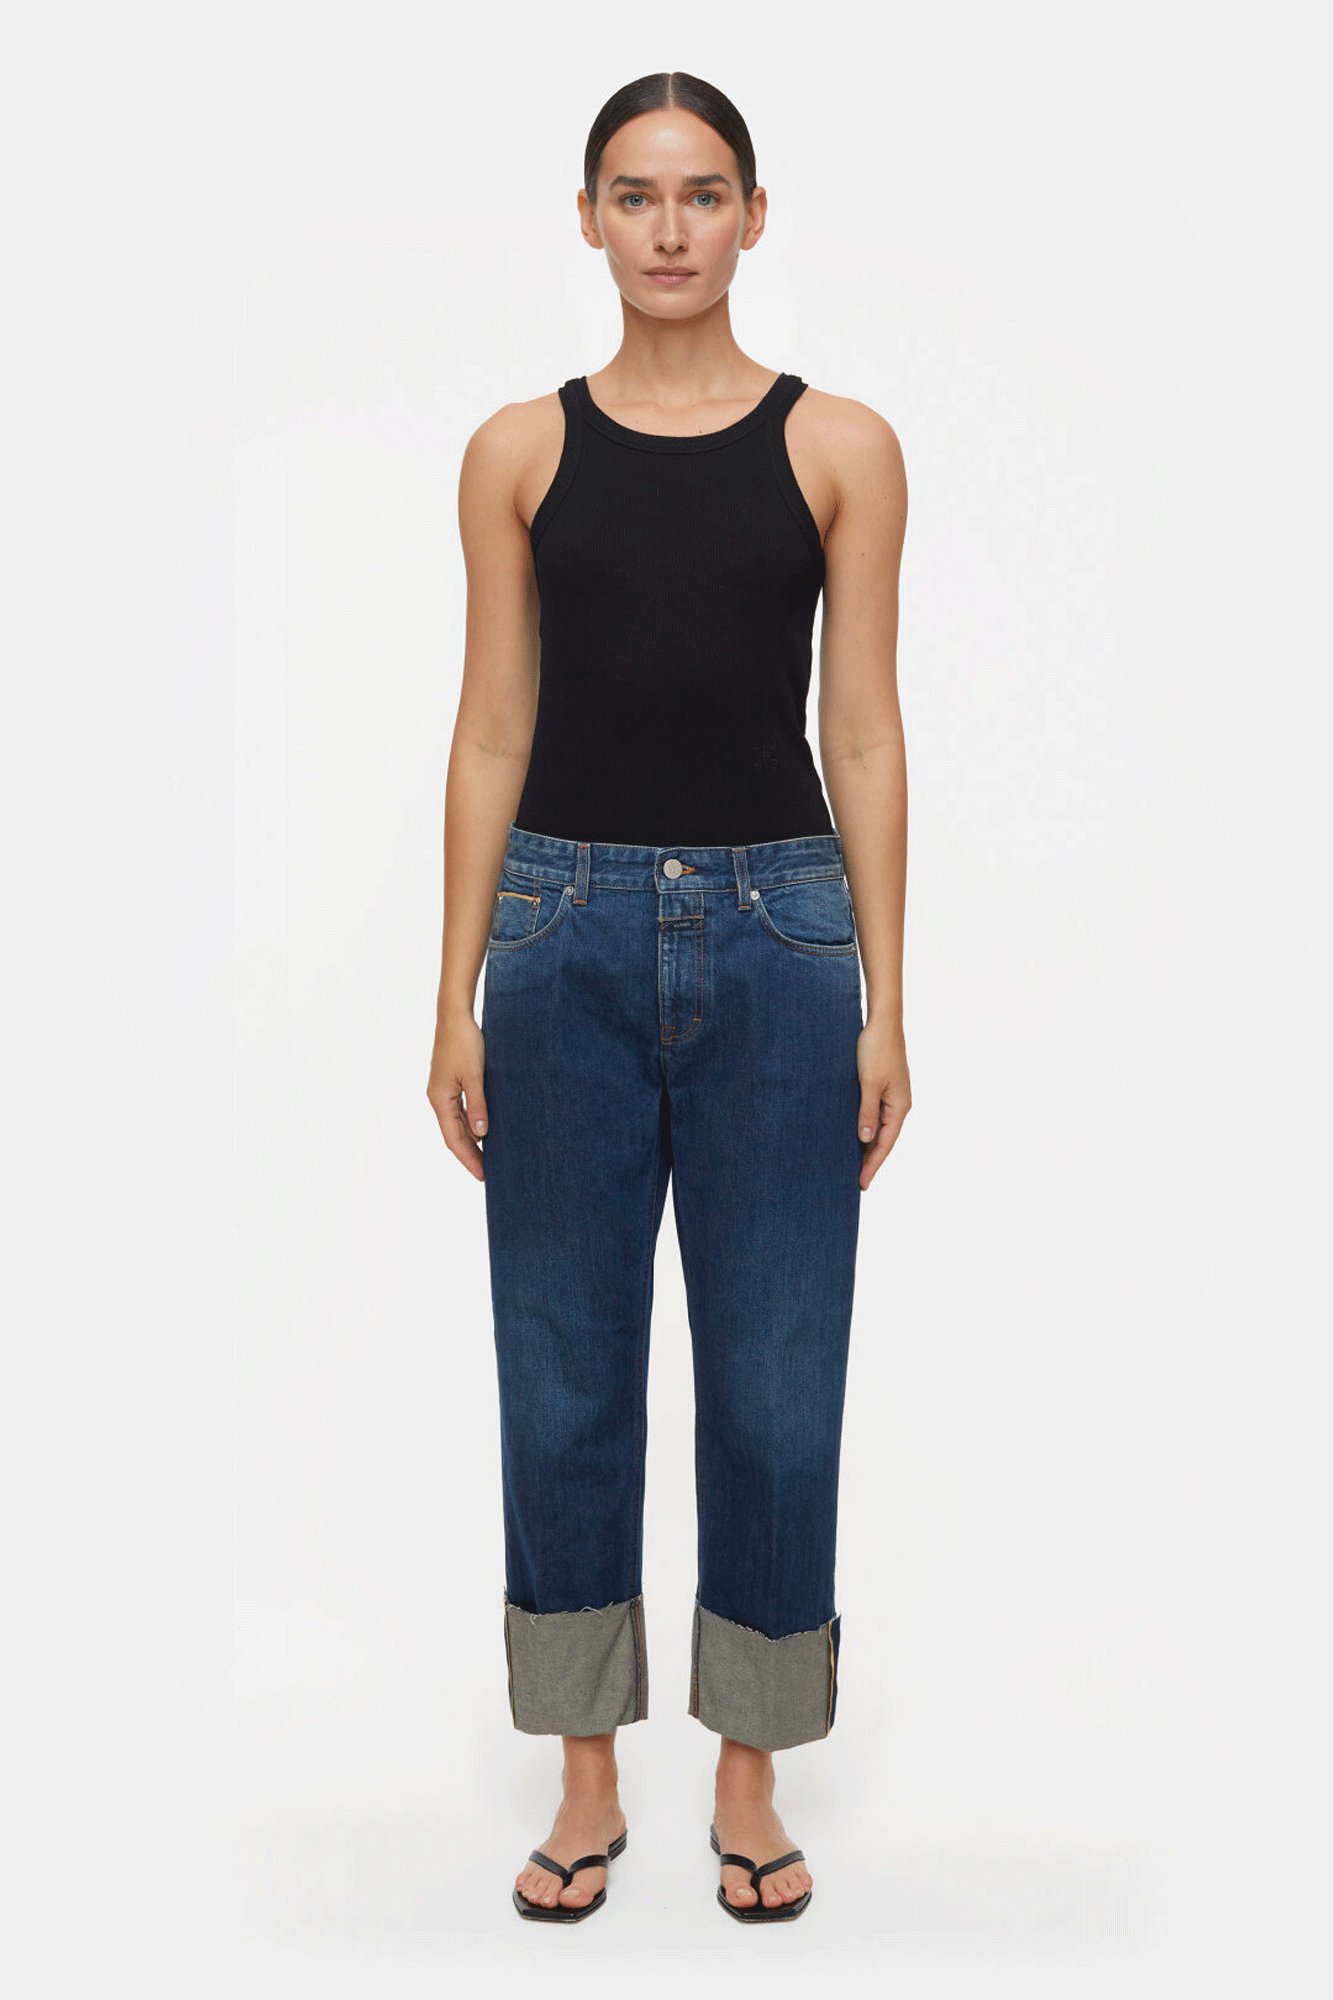 Milo is an Italian-made denim pant from Closed crafted from regenerative cotton materials. Woven on traditional shuttle looms, the style is mid-waisted and slim-fitting with a flared leg cut. Part of the eco-friendly A Better Blue line, Milo offers a modern look with sustainable materials.